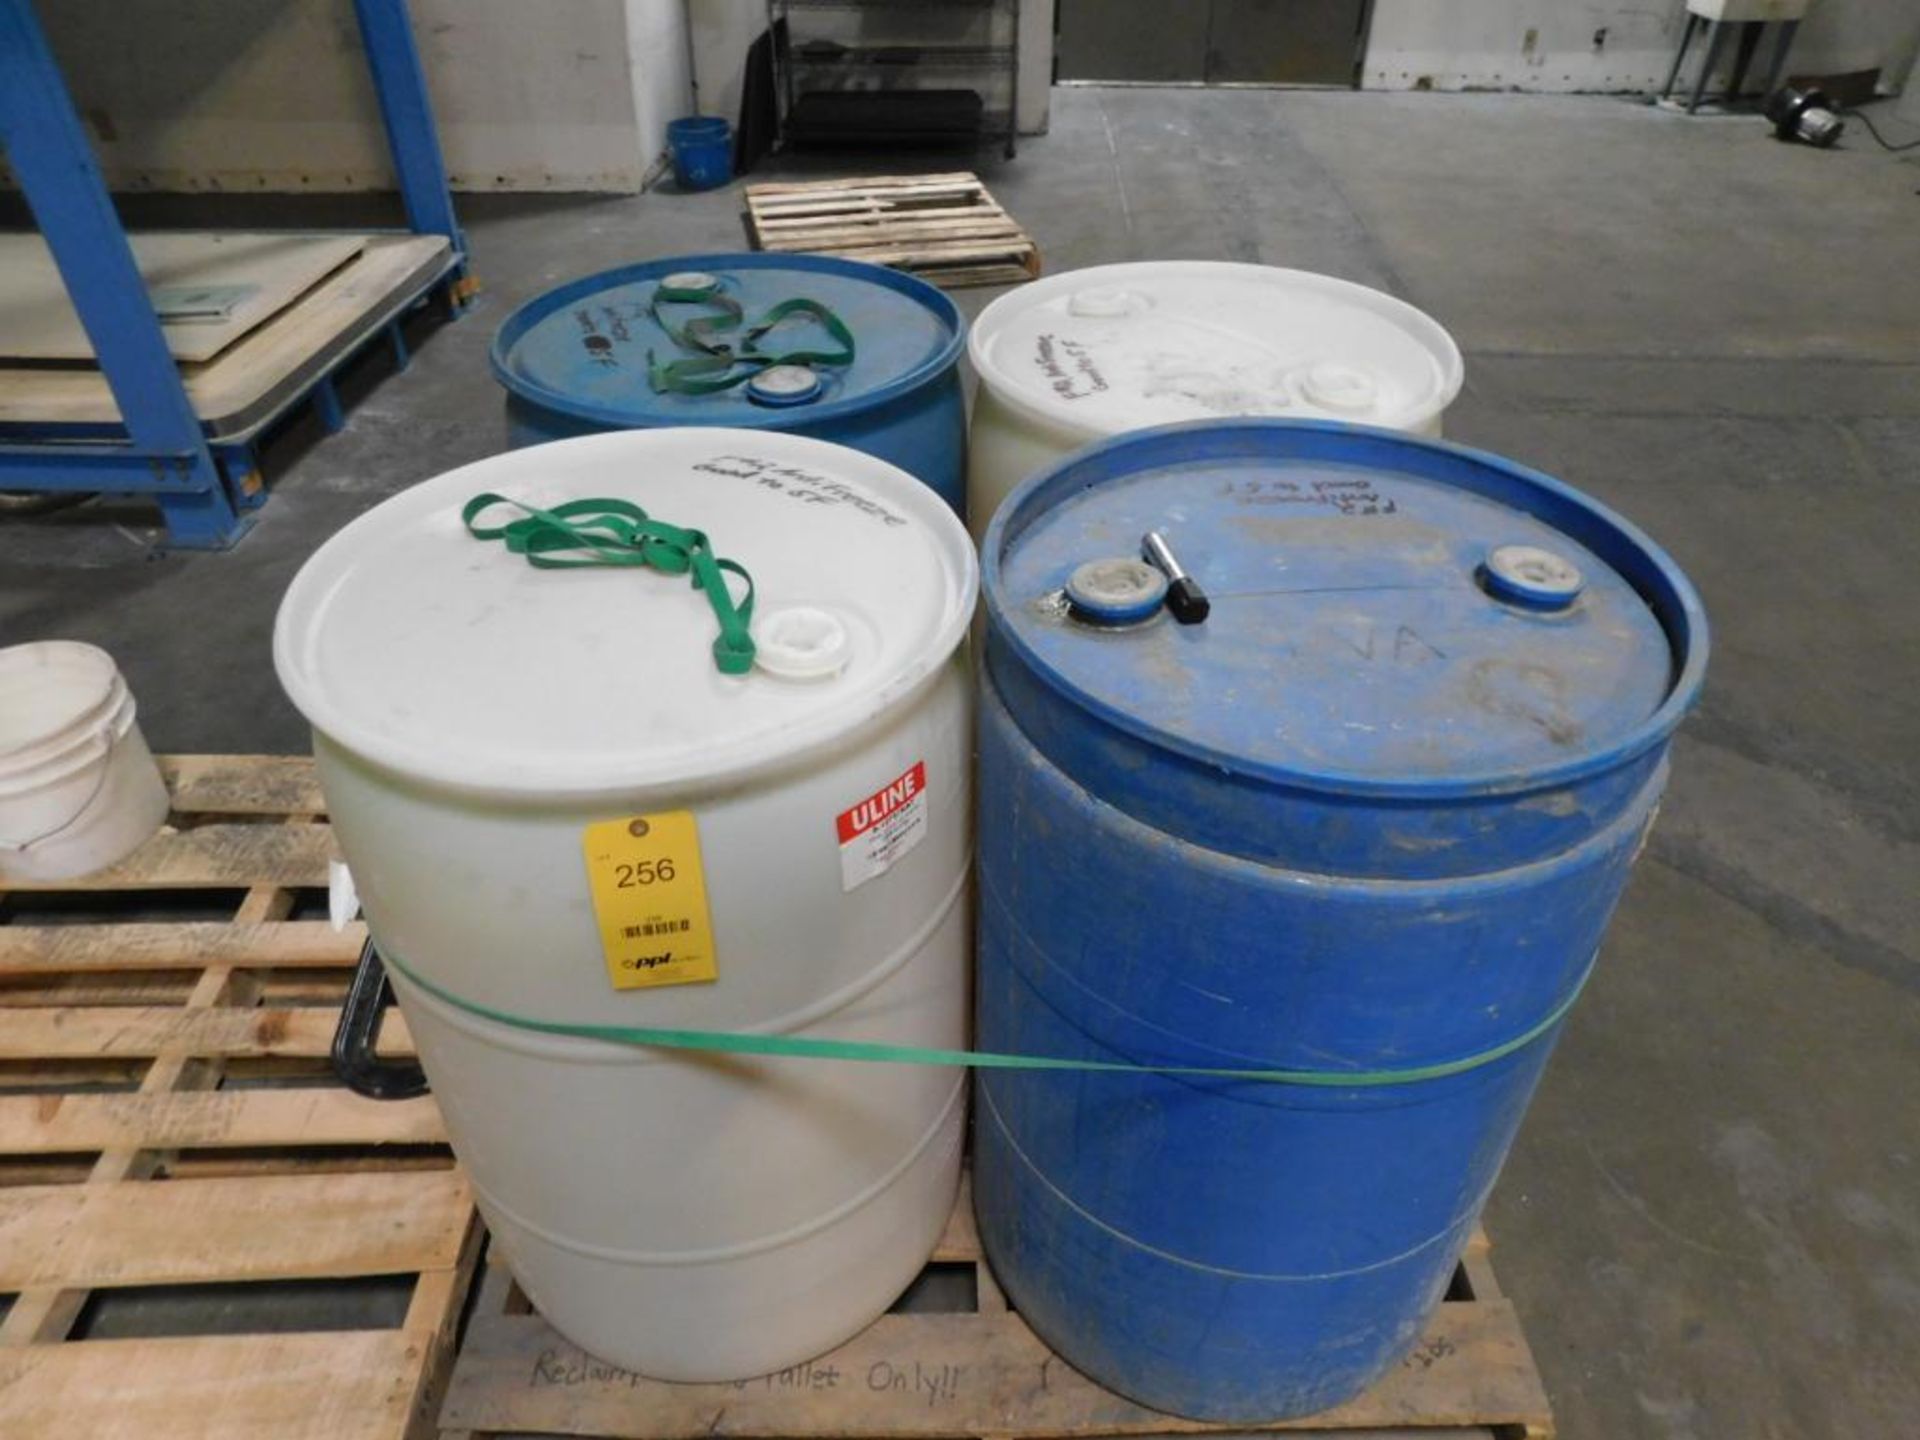 LOT: (4) 55 Gallon Barrels Anti-Freeze for Furnaces - protects to 5 Degrees F